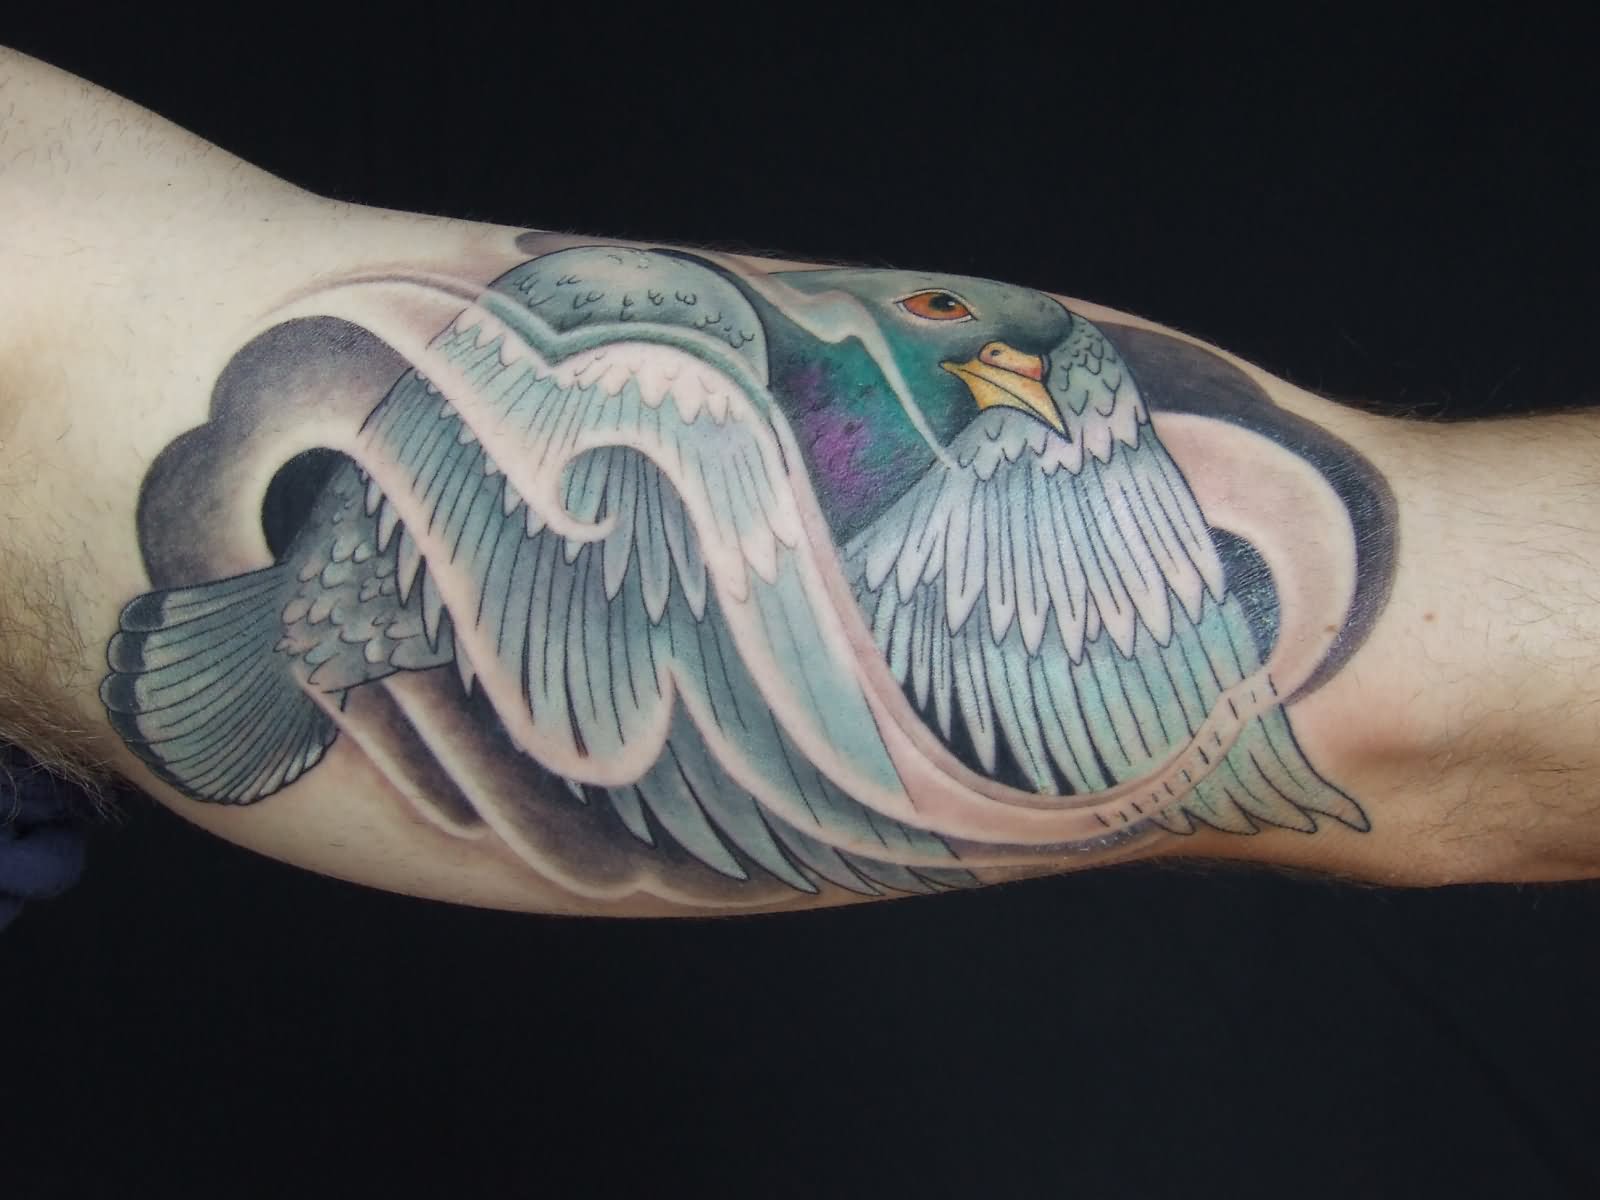 Awesome Pigeon Tattoo Design For Bicep